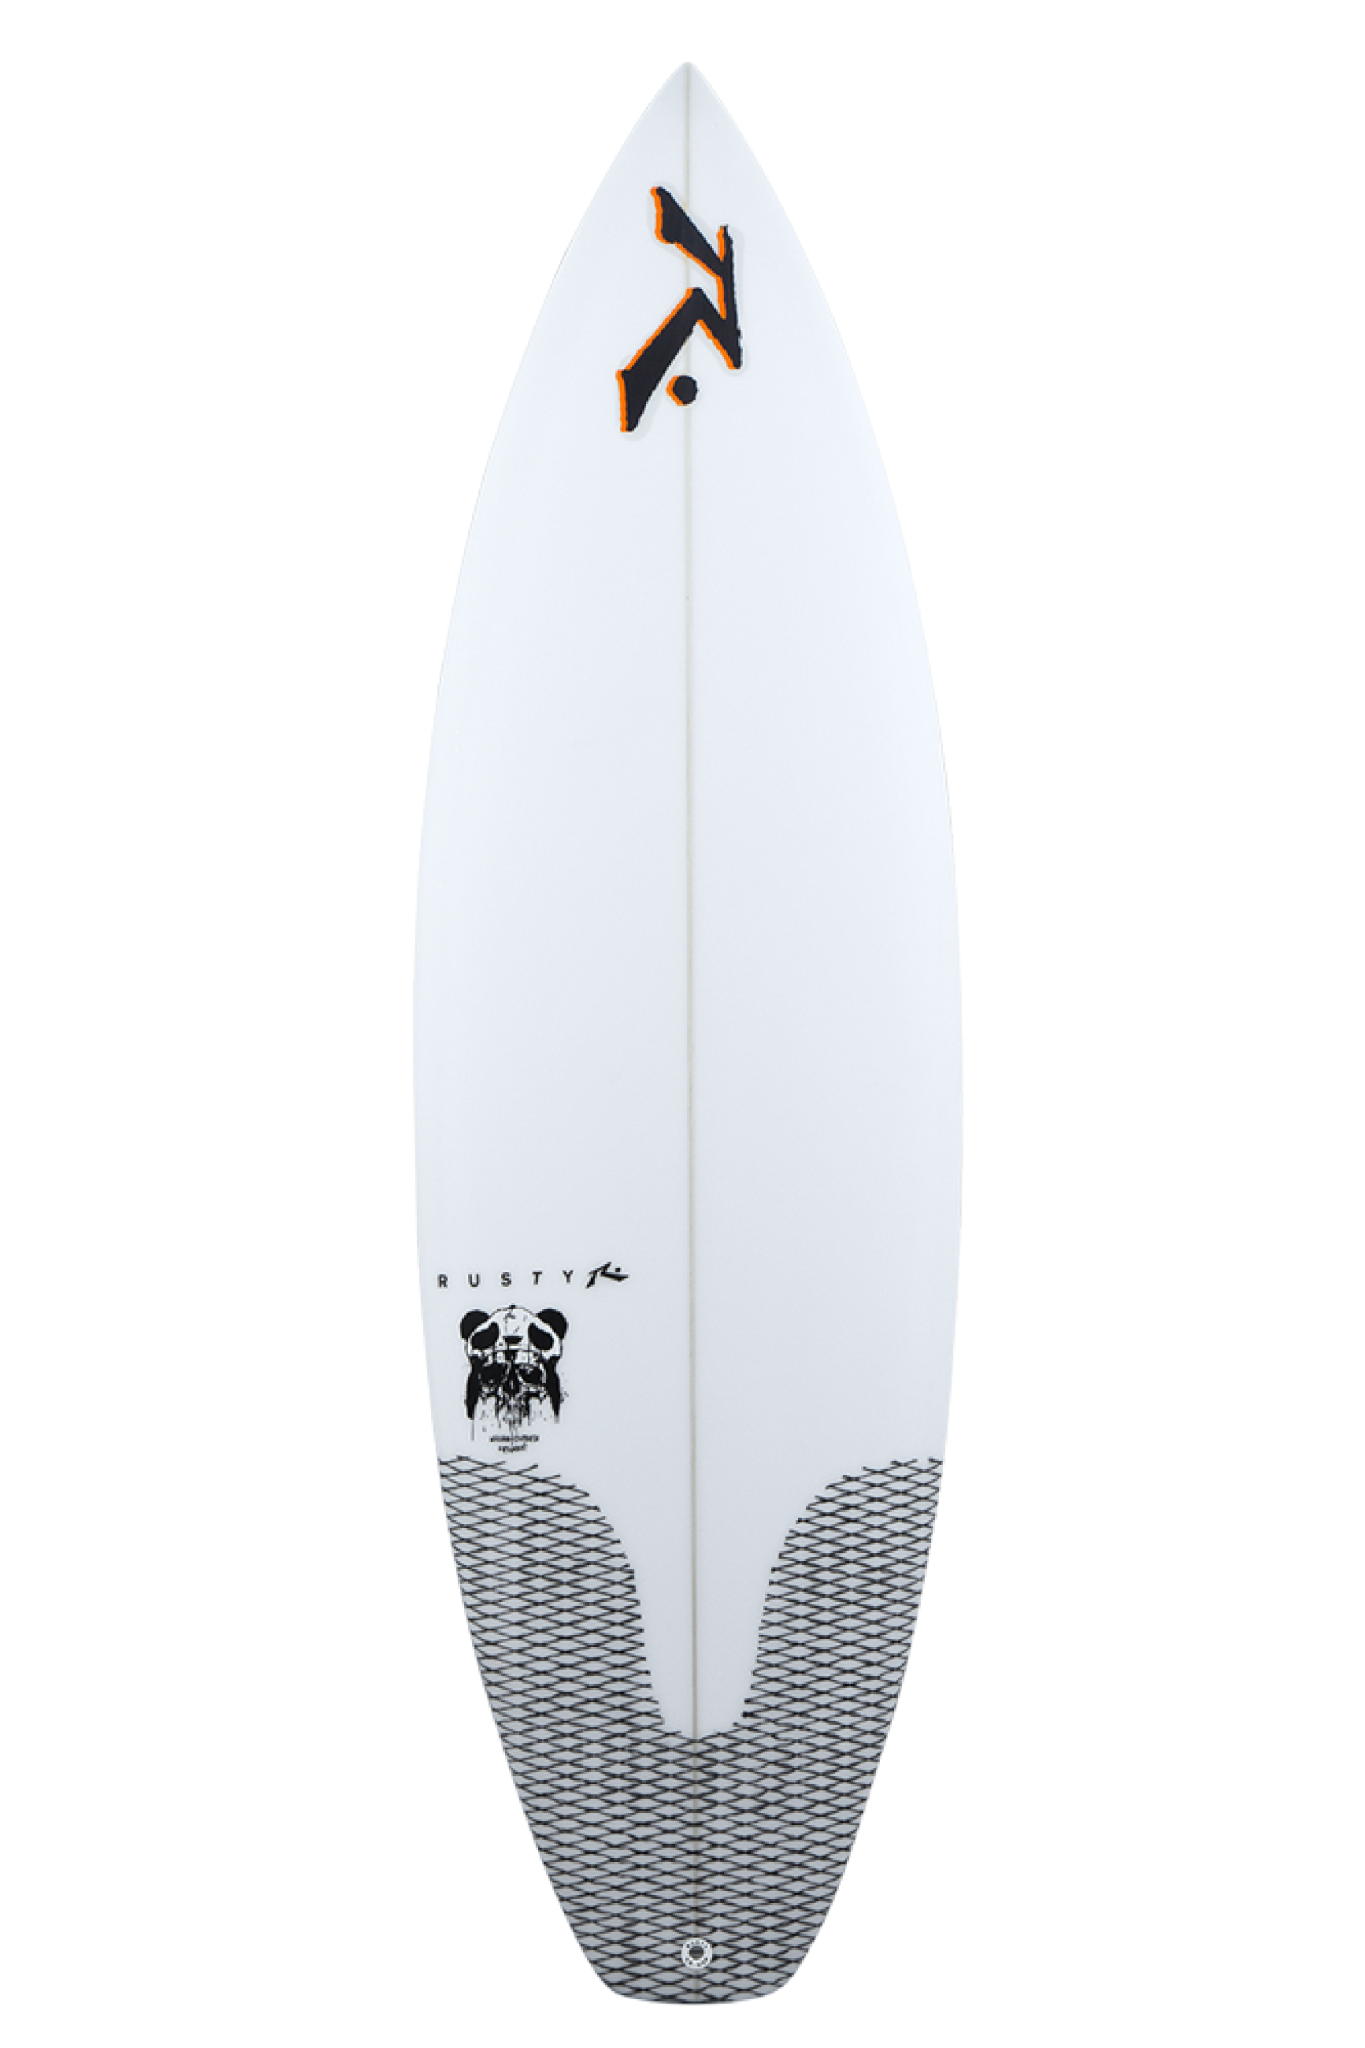 Panda | Surfboards-Rusty Surfboards South Africa